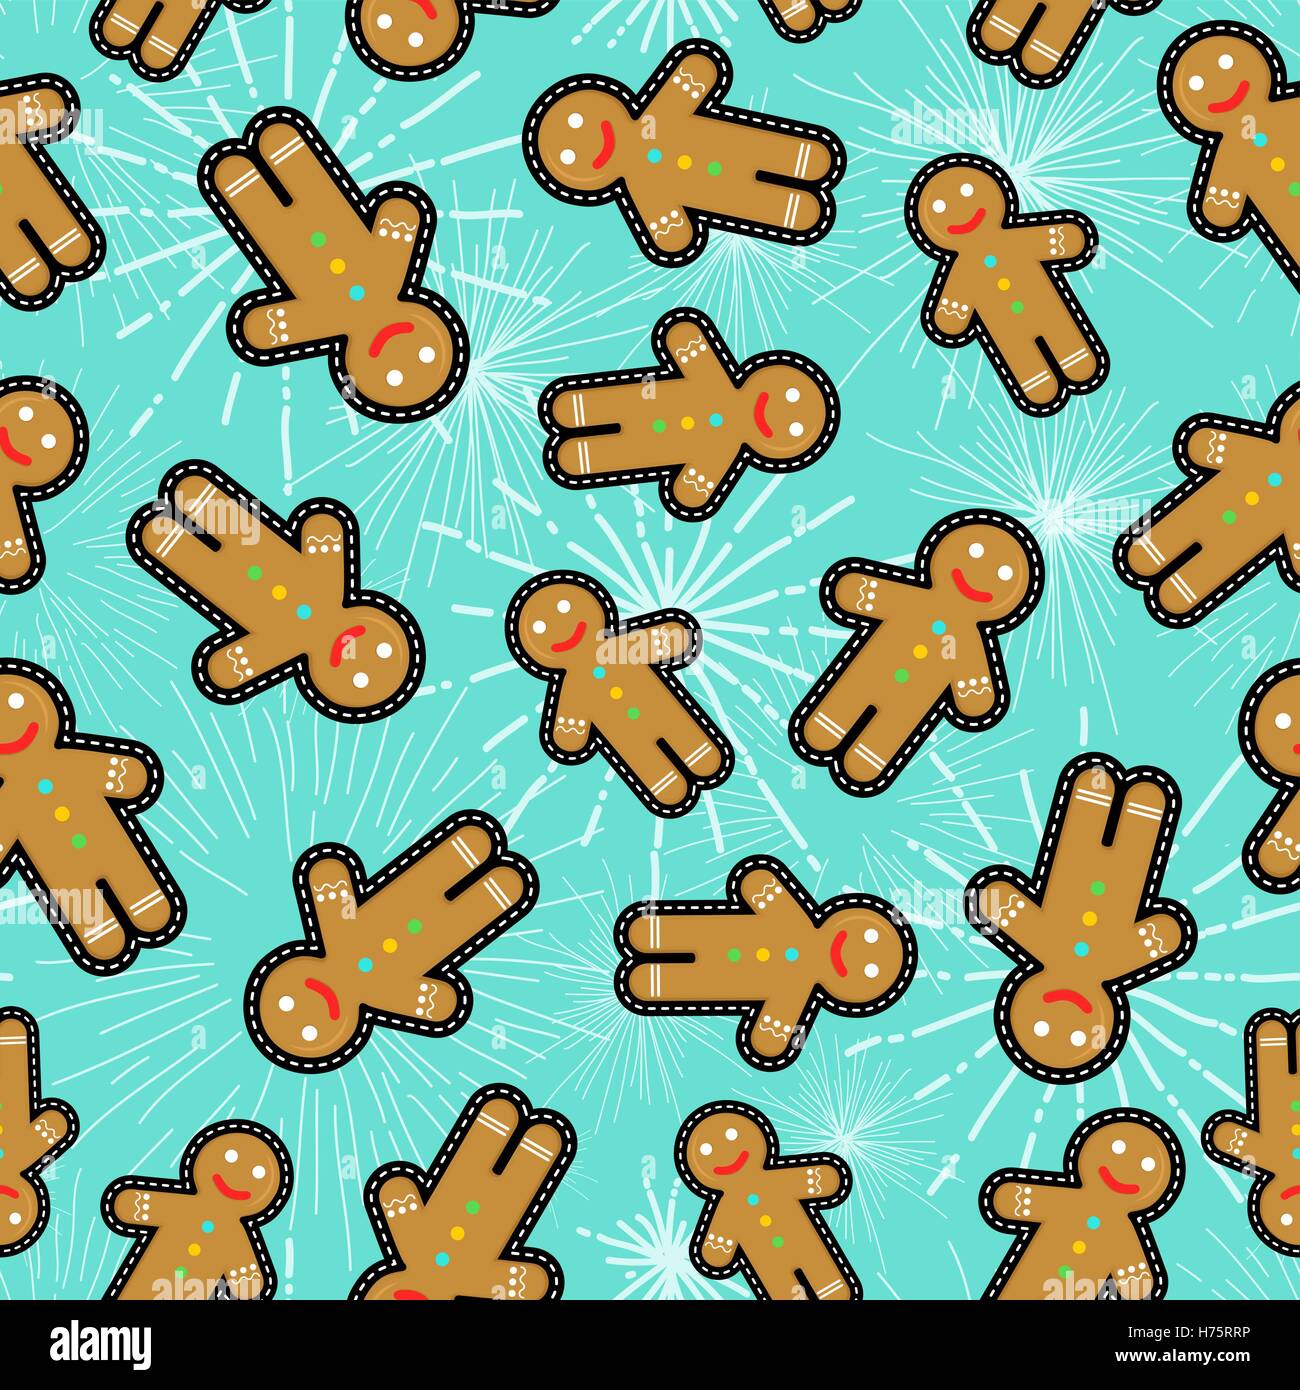 Seamless pattern with gingerbread man cookie patch icon for holiday decoration background. EPS10 vector. Stock Vector